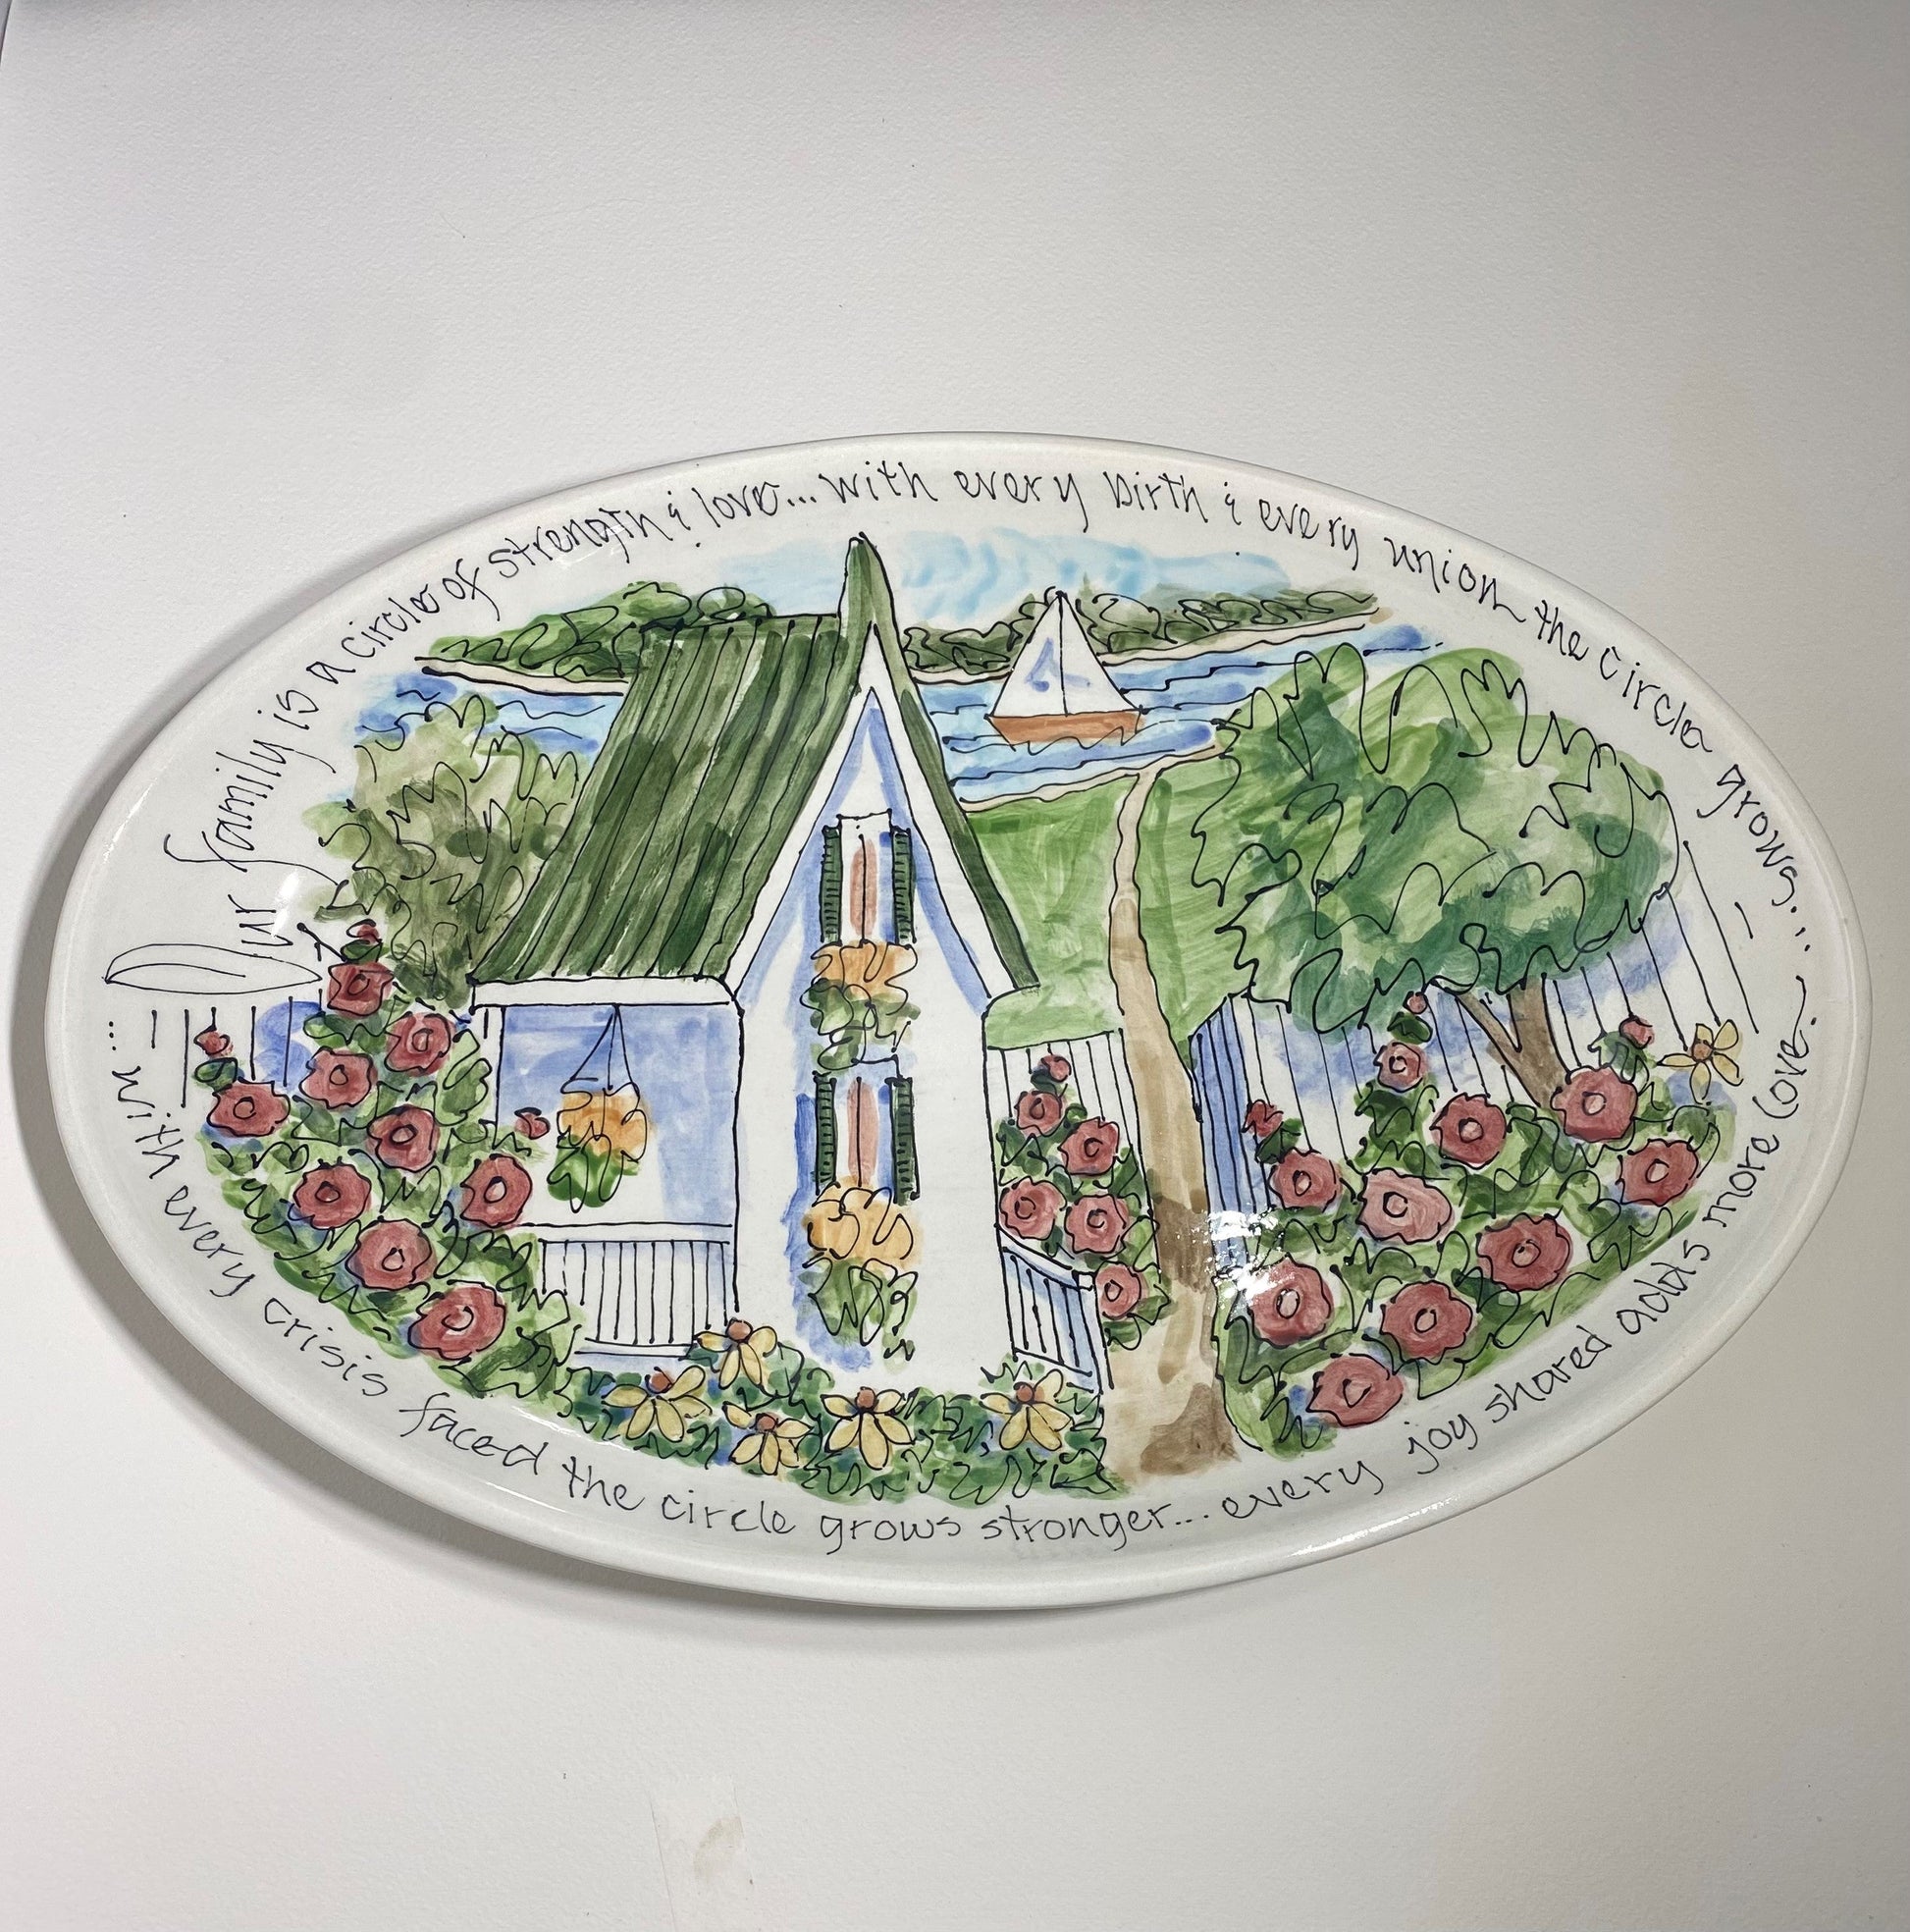 Jan Francoeur Platter Oval Lg Our Family🎨 Jan's Celebration Pottery🎨 Buy Art at Carolina Creations Gallery in Downtown New Bern🎨